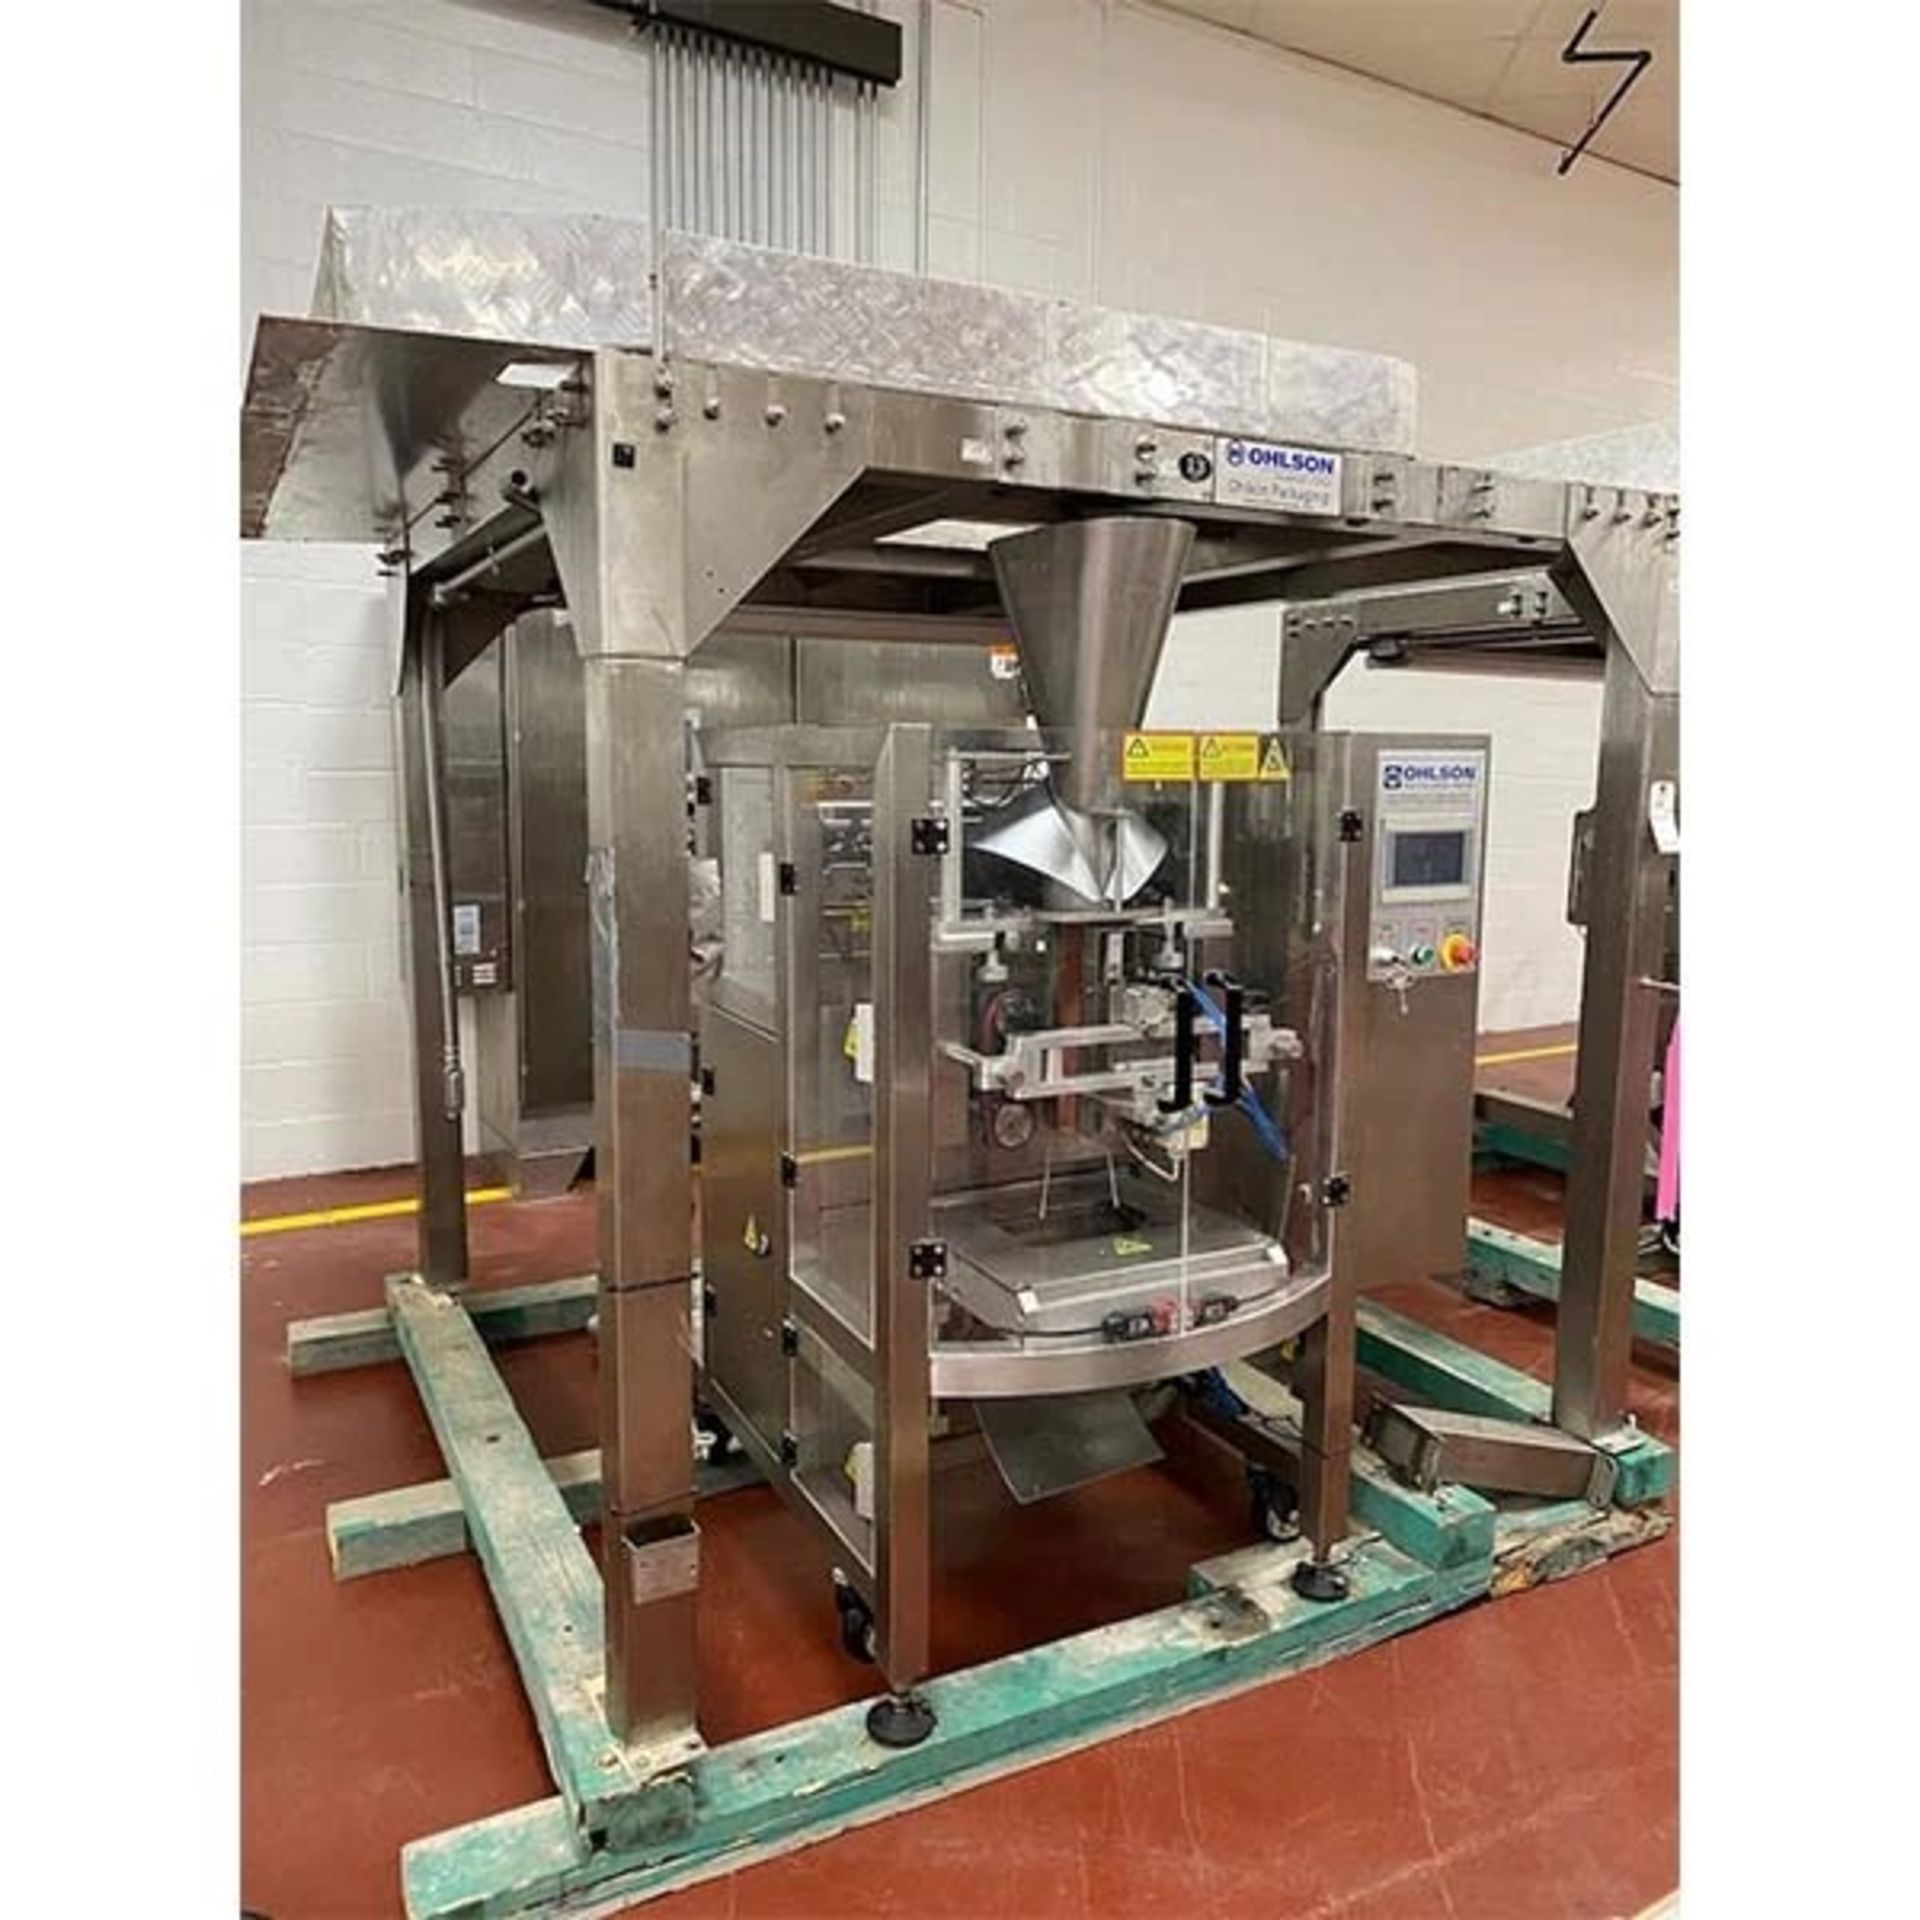 2018/2019 Ohlson Continuous Weighing and Vertical Form, Fill and Seal System includes